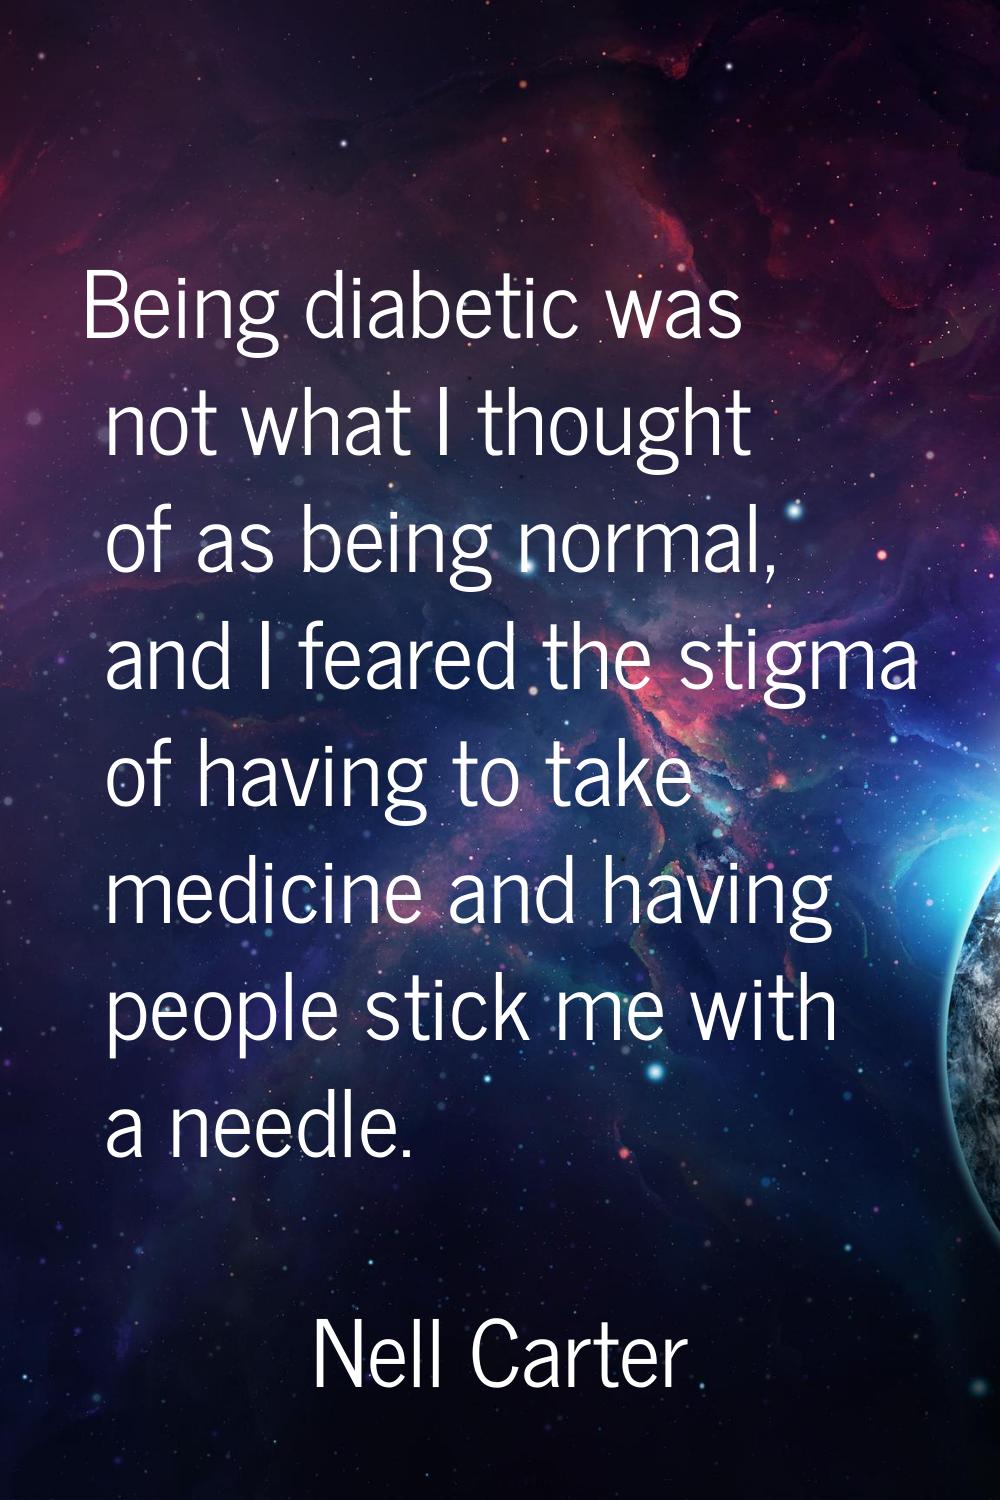 Being diabetic was not what I thought of as being normal, and I feared the stigma of having to take